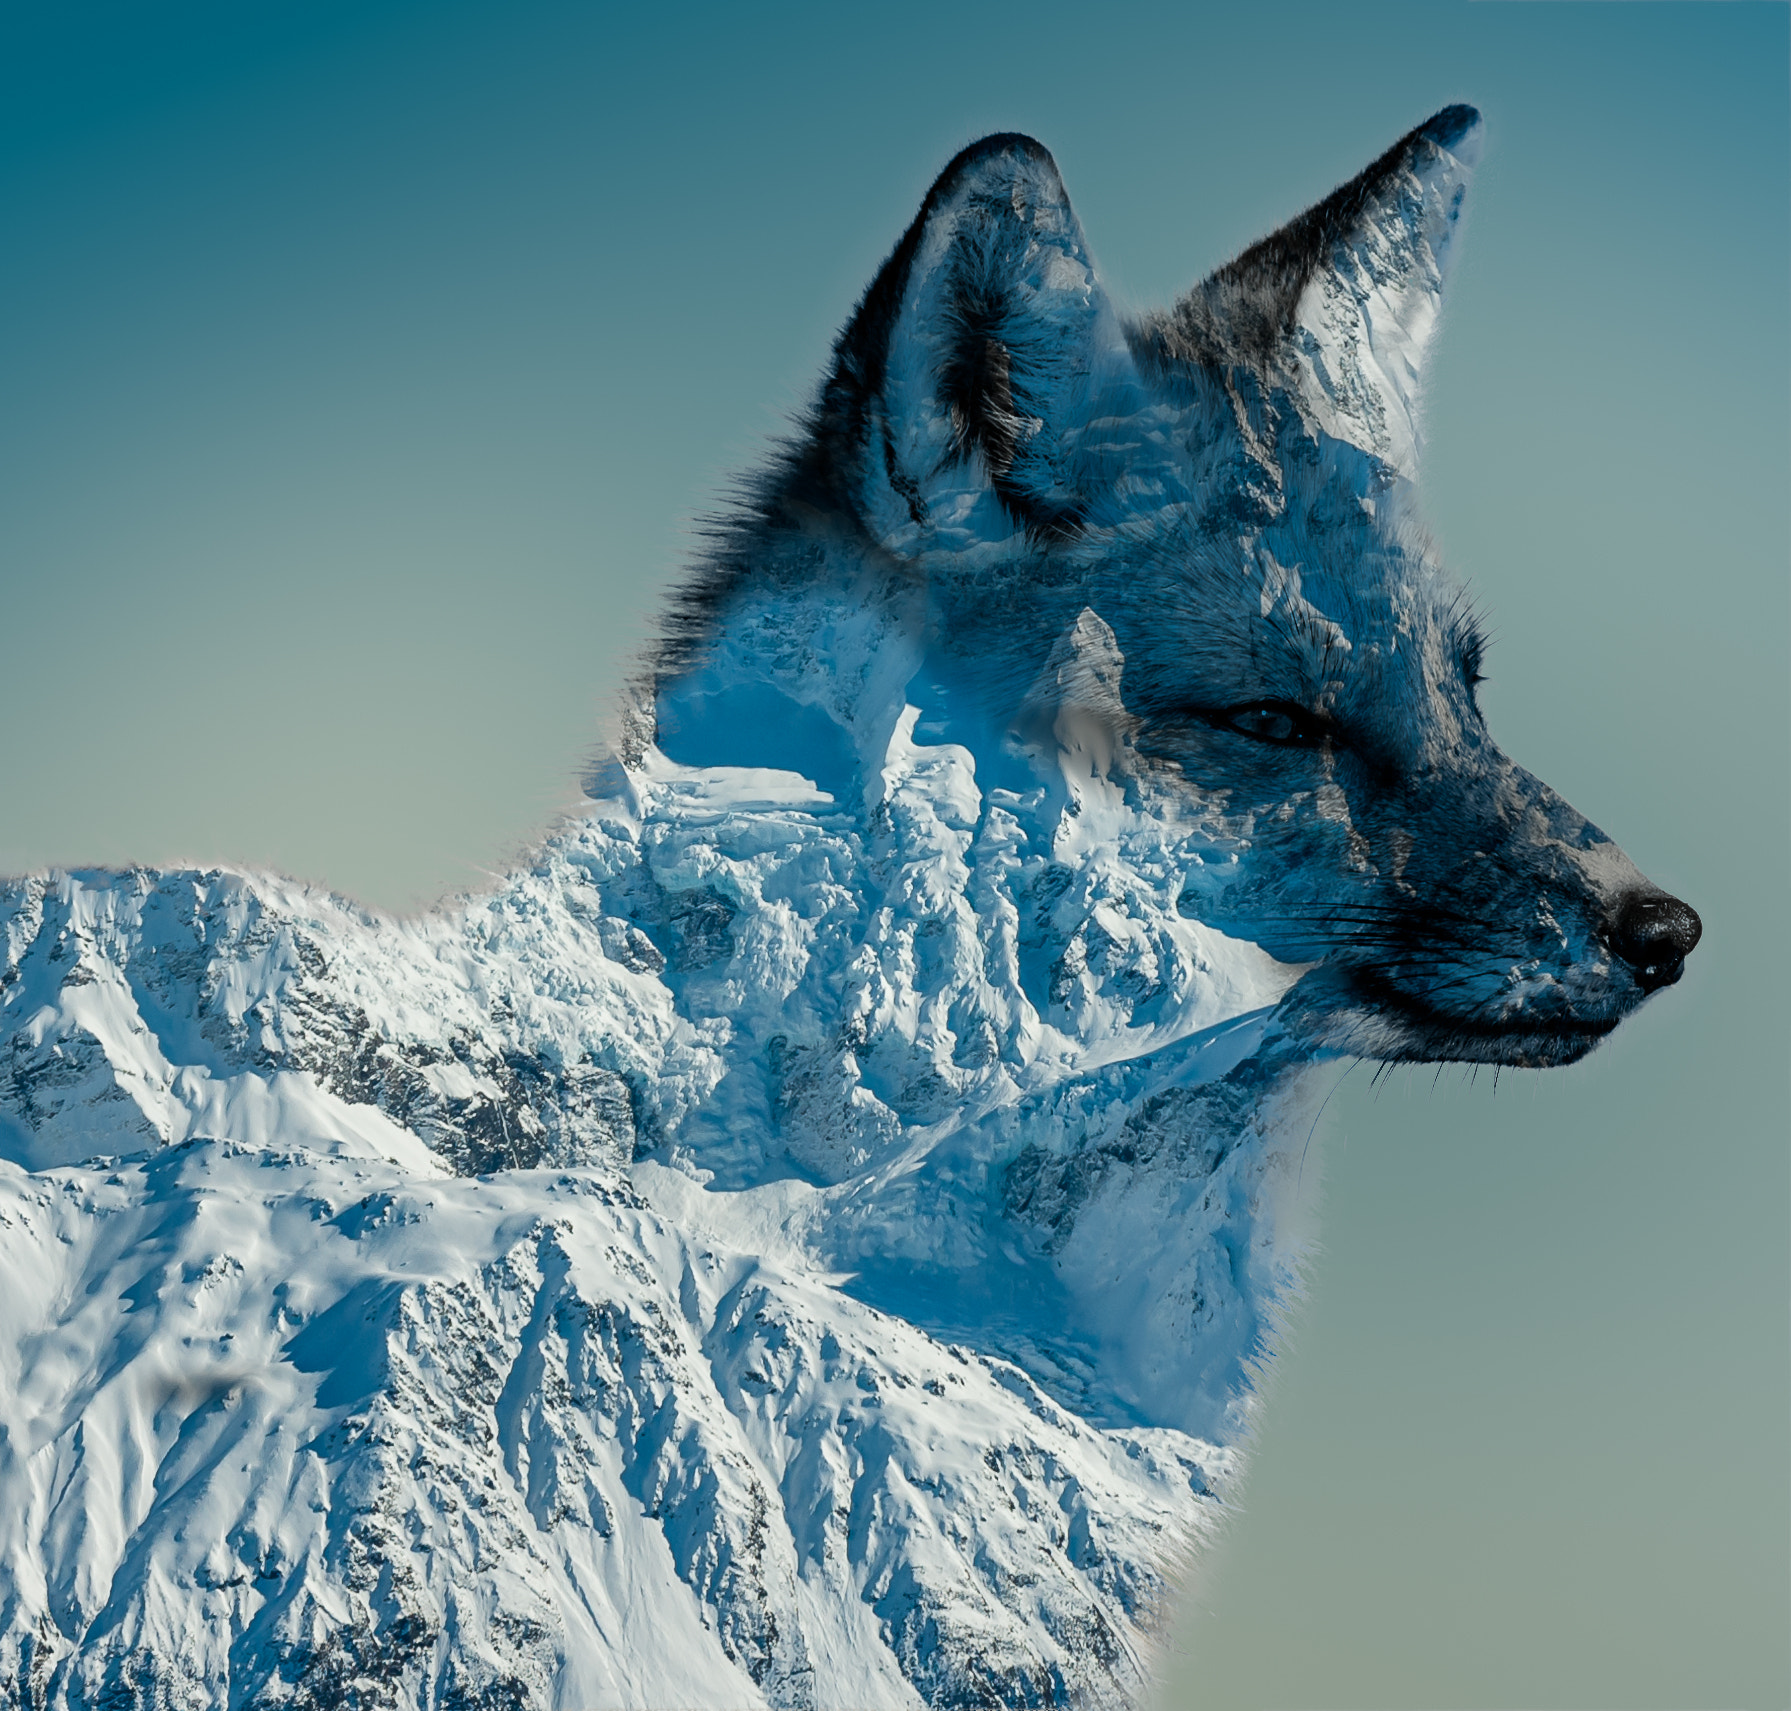 Nikon D750 + Sigma 150-600mm F5-6.3 DG OS HSM | C sample photo. Fox in the mountains photography